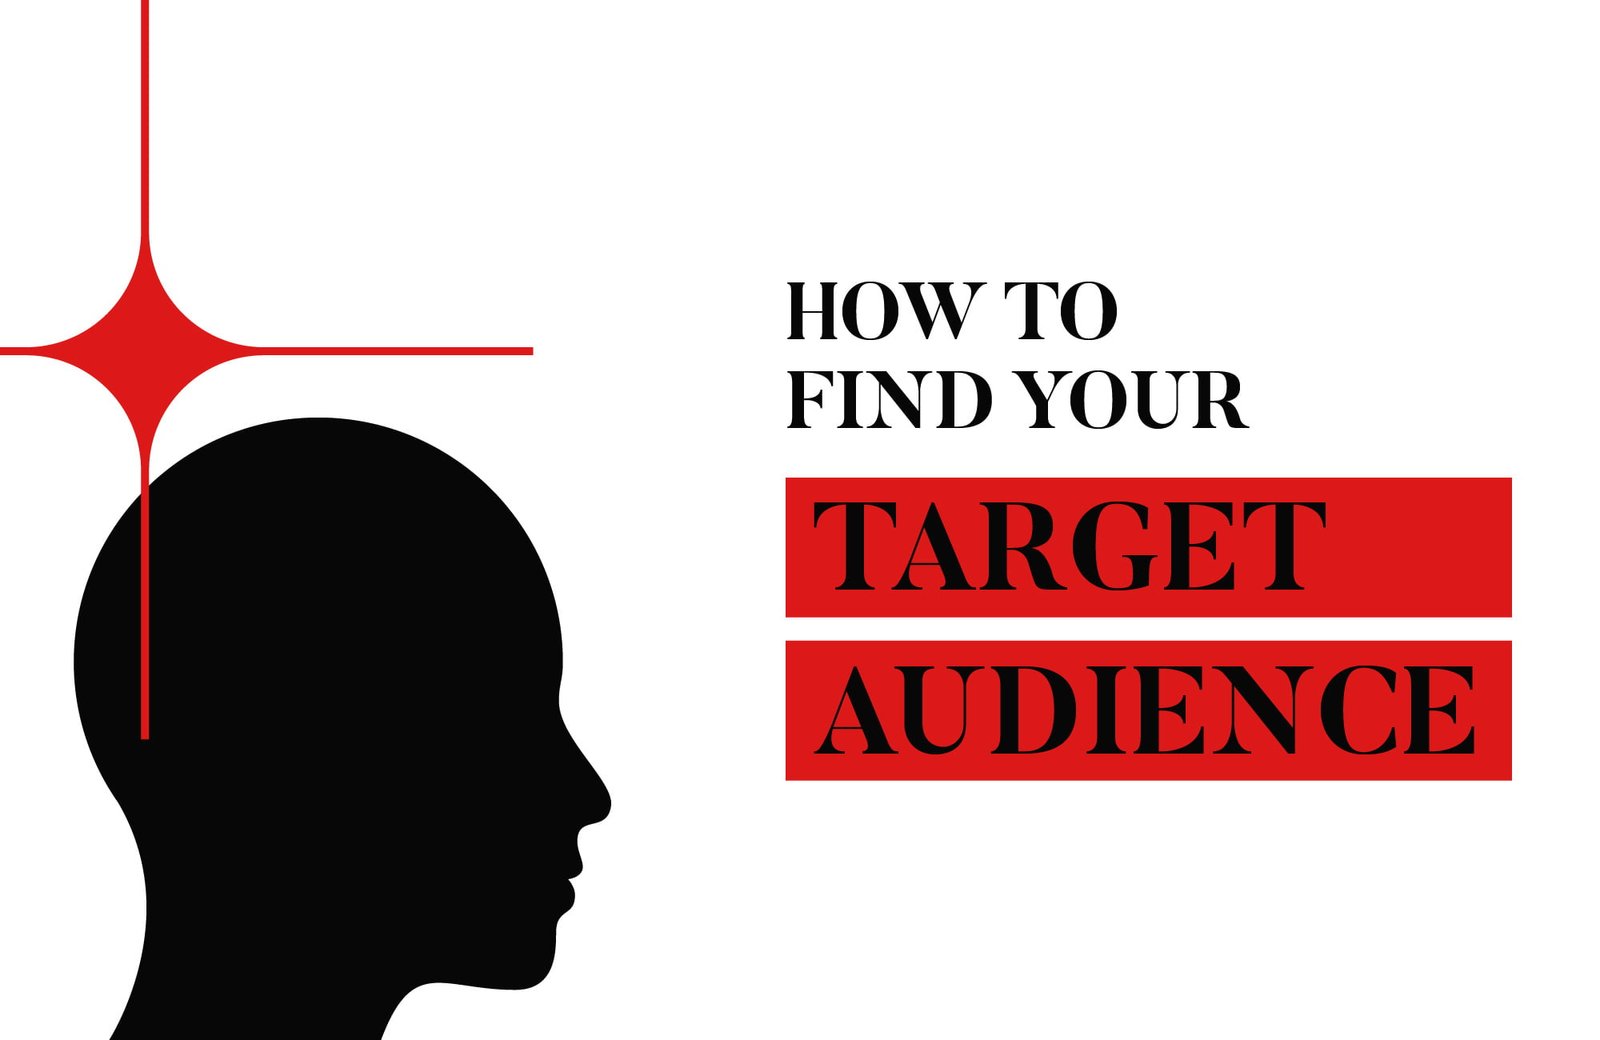 Define your target audience